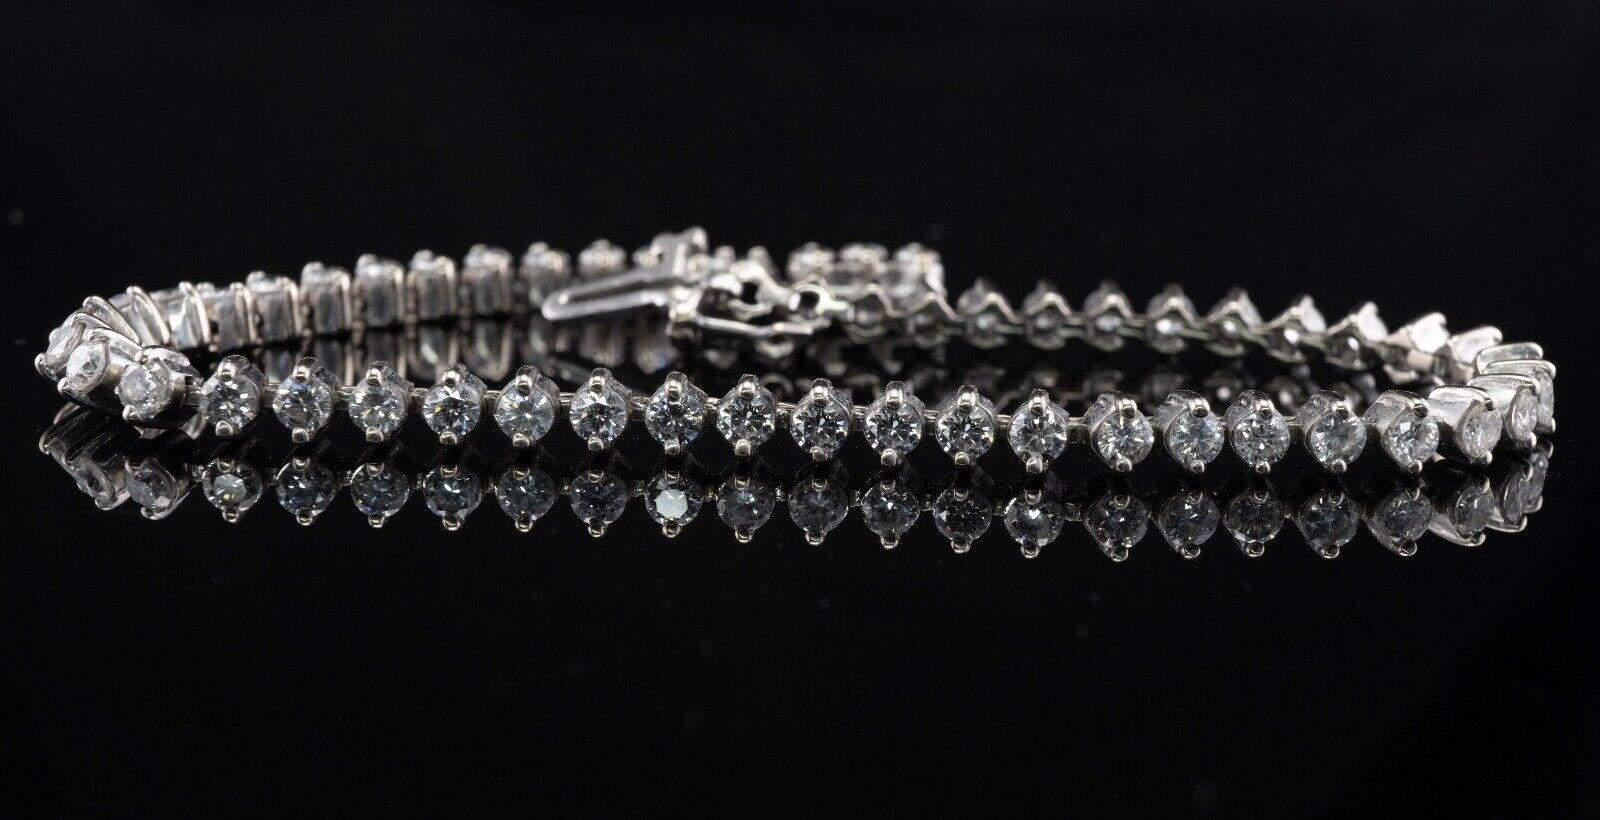 This amazing estate tennis bracelet is crafted in solid 14K White gold and set with white and fiery round brilliant cut diamonds. There are 55 diamonds of SI1 clarity and H color totaling 3.00 carats. The width of the bracelet is 3.8mm and it is